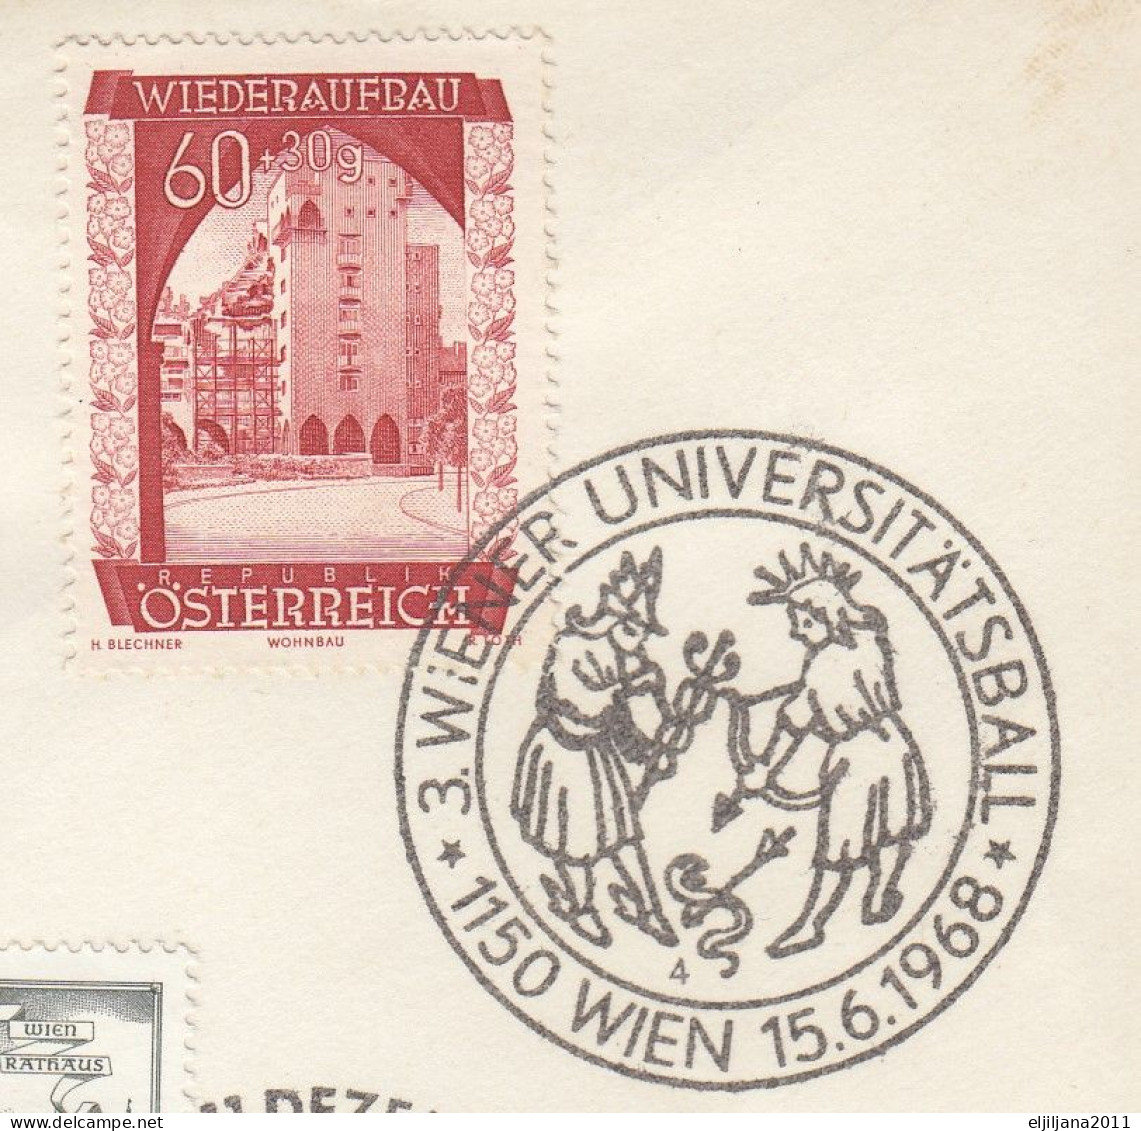 ⁕ Austria 1968 ⁕ WIEN - Nice Envelope With Commemorative Postmarks ⁕ FLUGPOSTAUSSTELLUNG - Covers & Documents